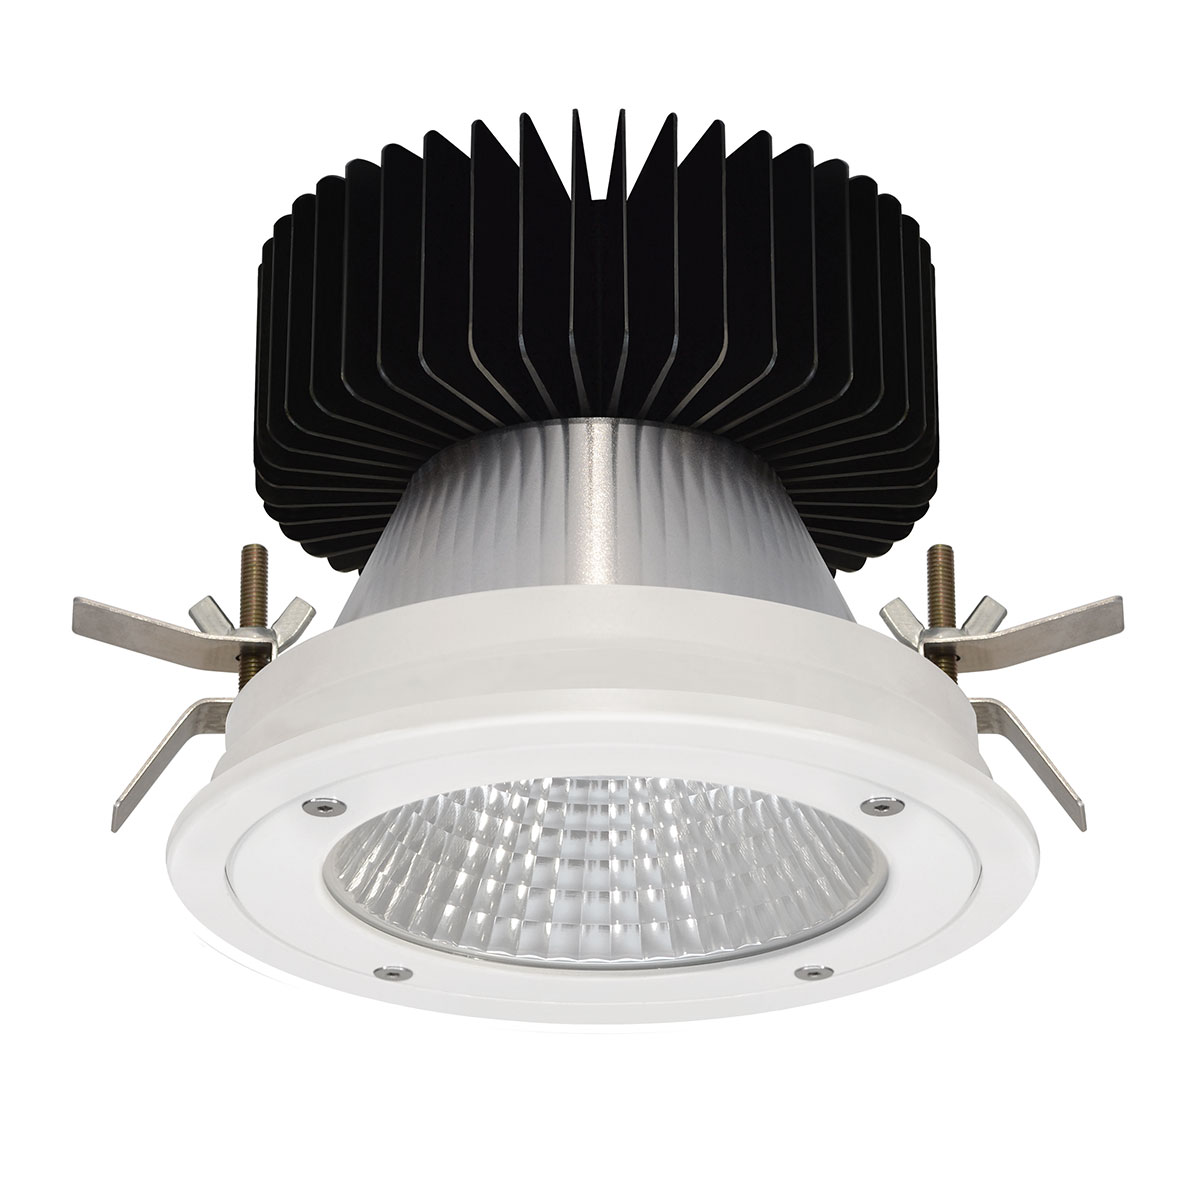 Kopa 22W Anti Tamper Fixed Round Recessed Downlight IP65 Rated 25° Degree Reflector White